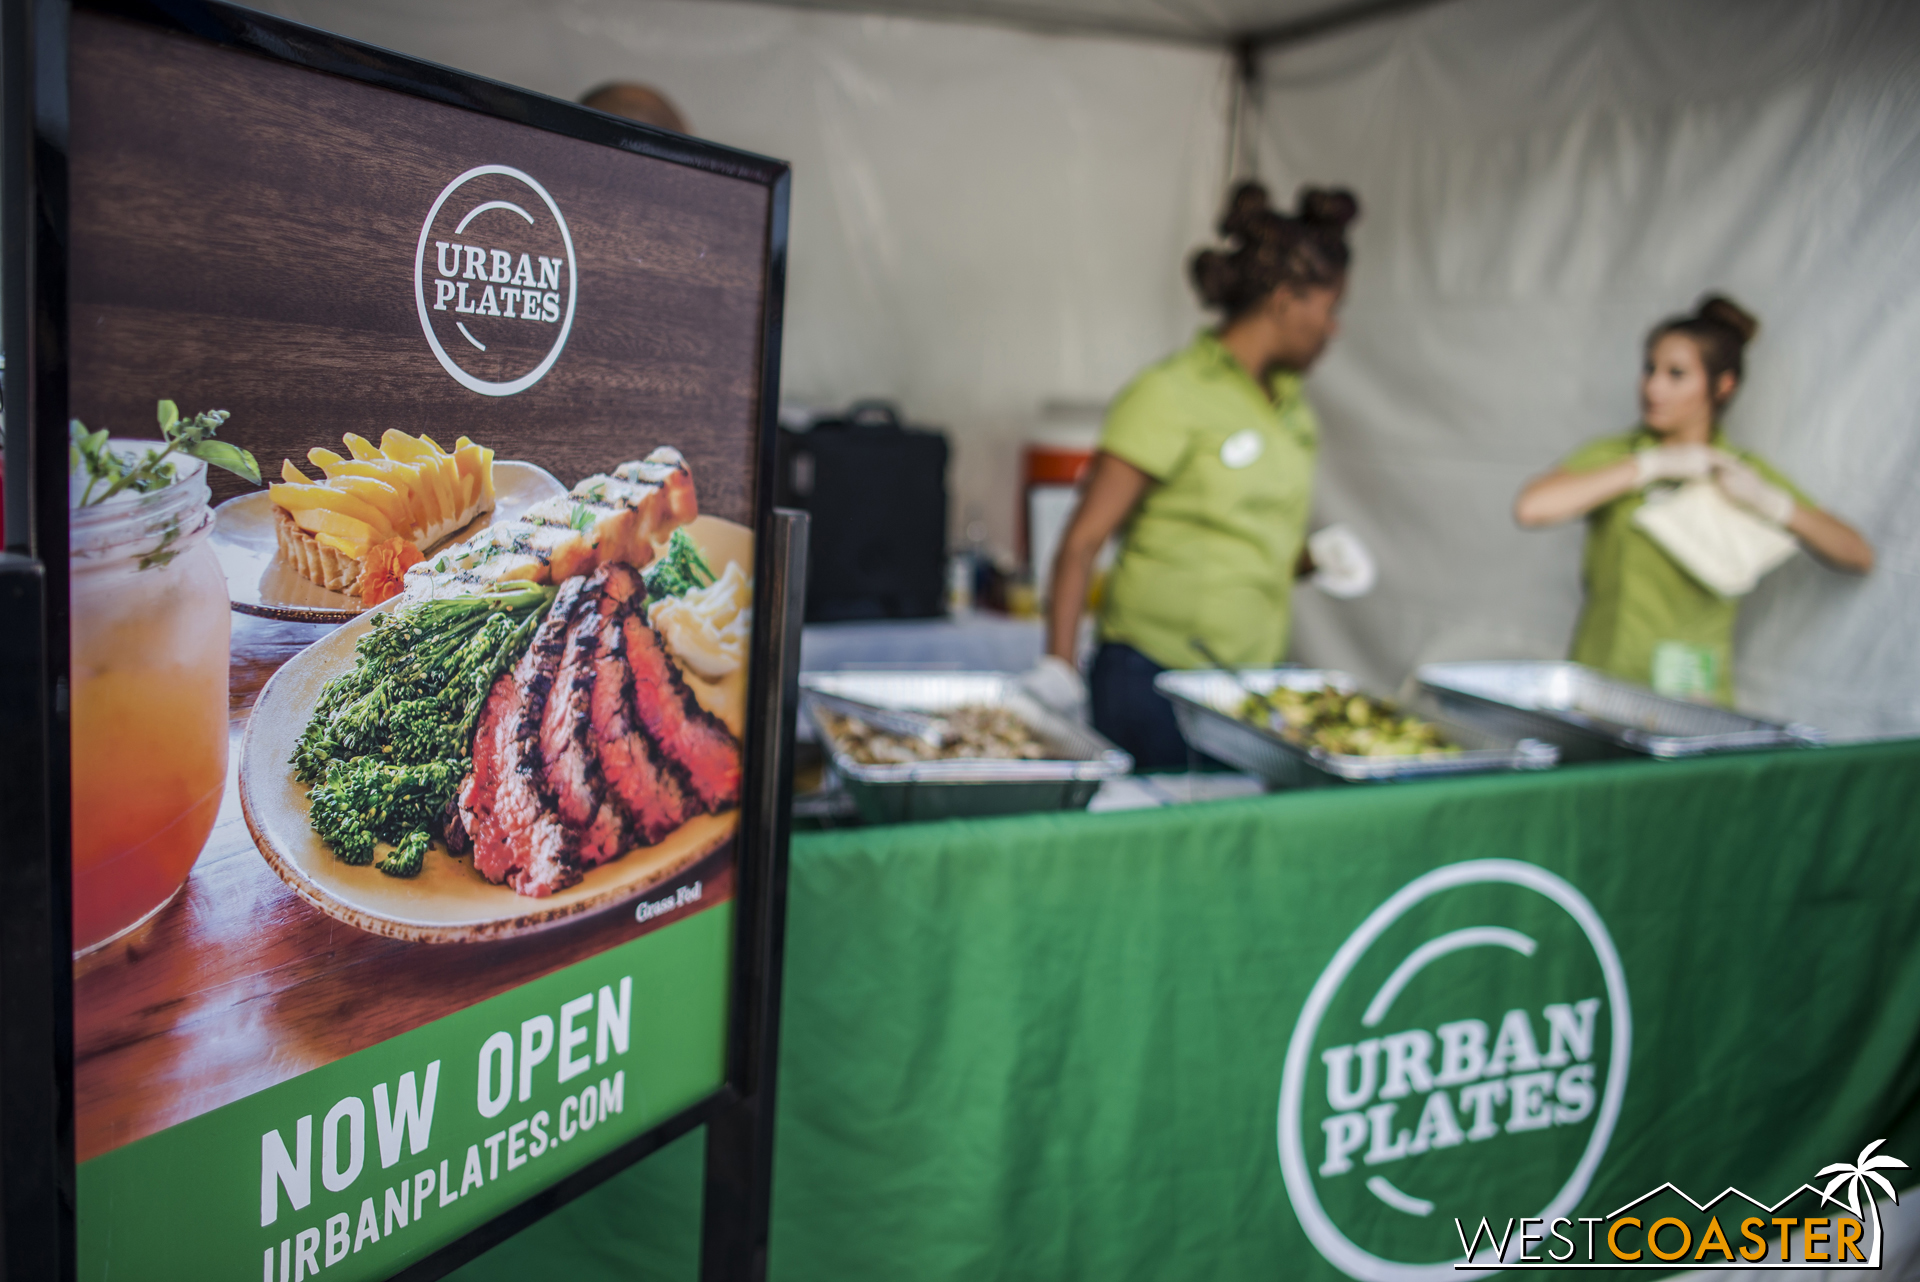  Urban Plates has recently opened up a location nearby and was giving out samples of some of its healthy-minded offerings. 